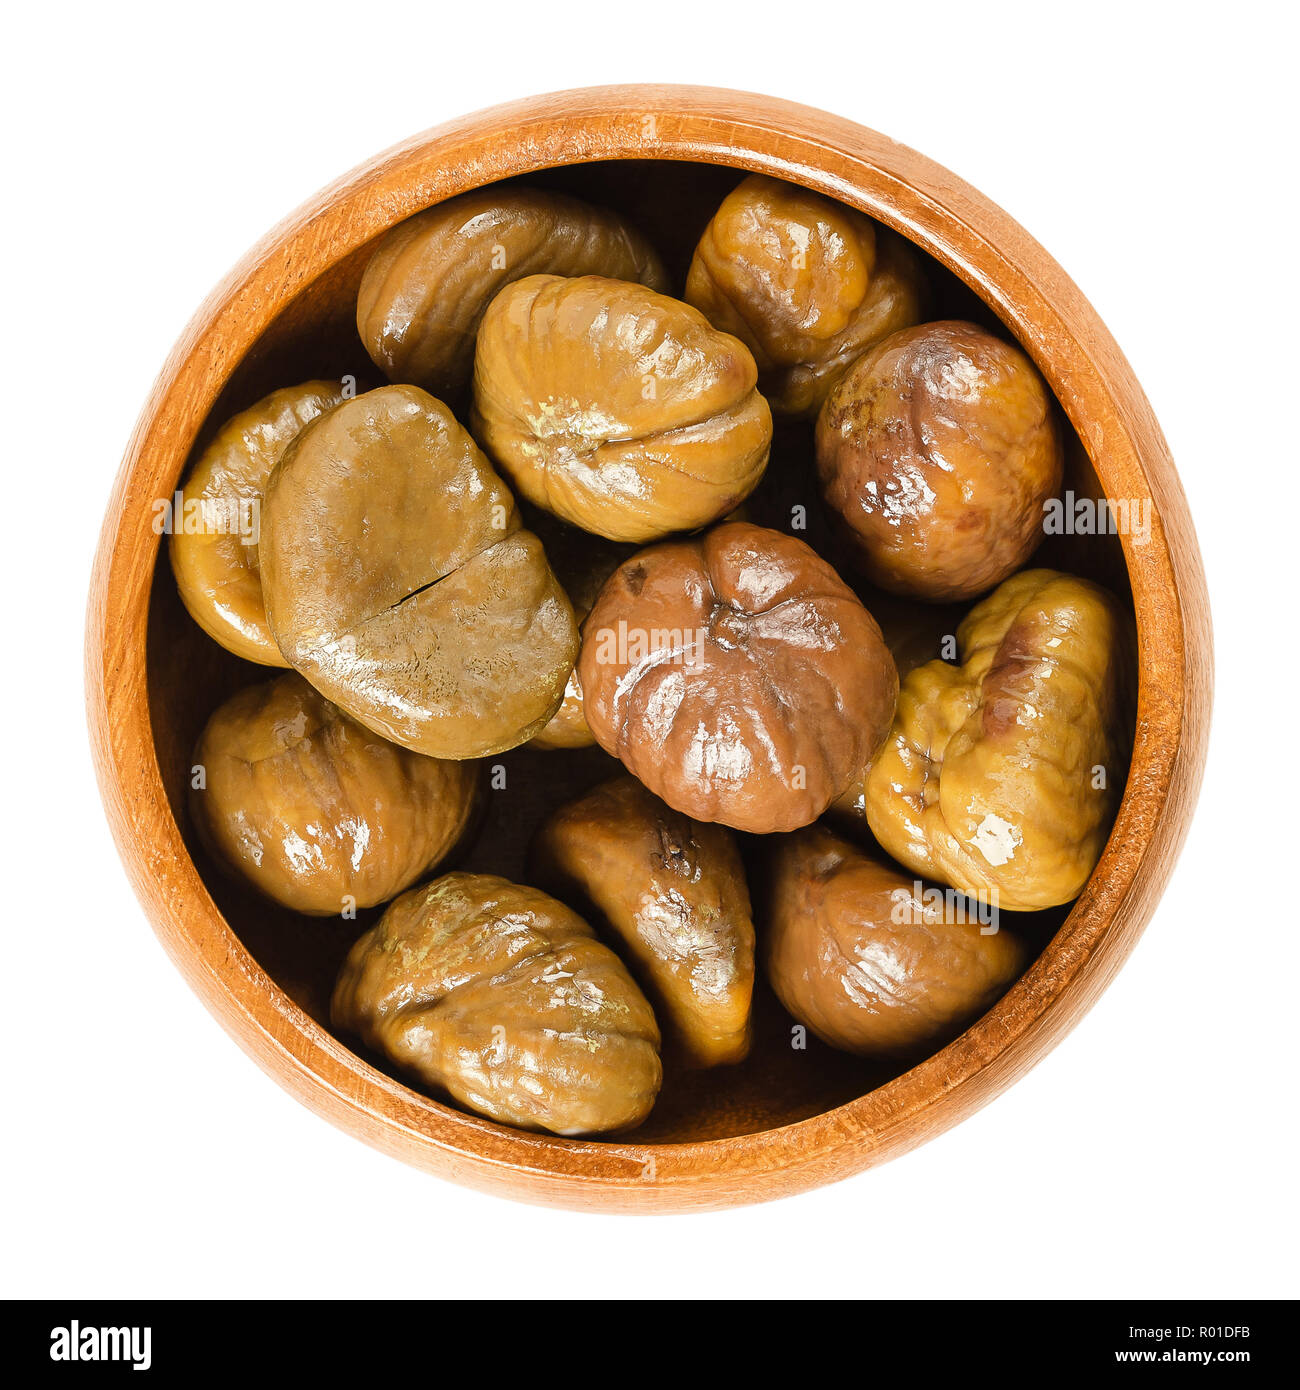 Cooked sweet chestnuts in wooden bowl. Edible seeds or nuts of Castanea sativa, also called marron and Spanish or Portuguese chestnut. Stock Photo